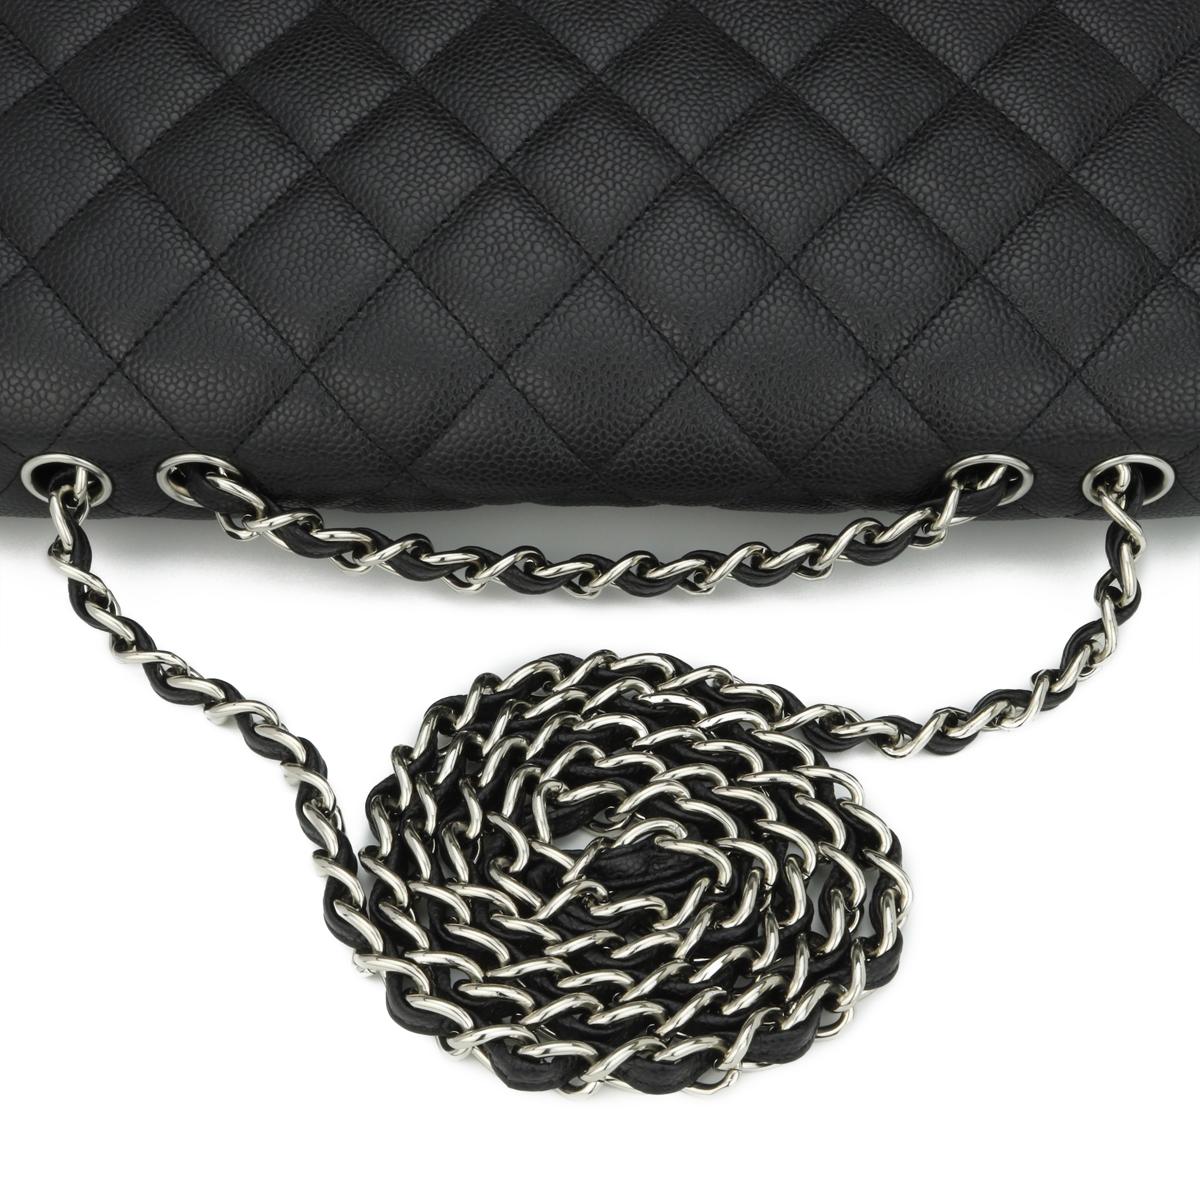 CHANEL Single Flap Jumbo Bag in Black Caviar with Silver-Tone Hardware 2010 For Sale 8